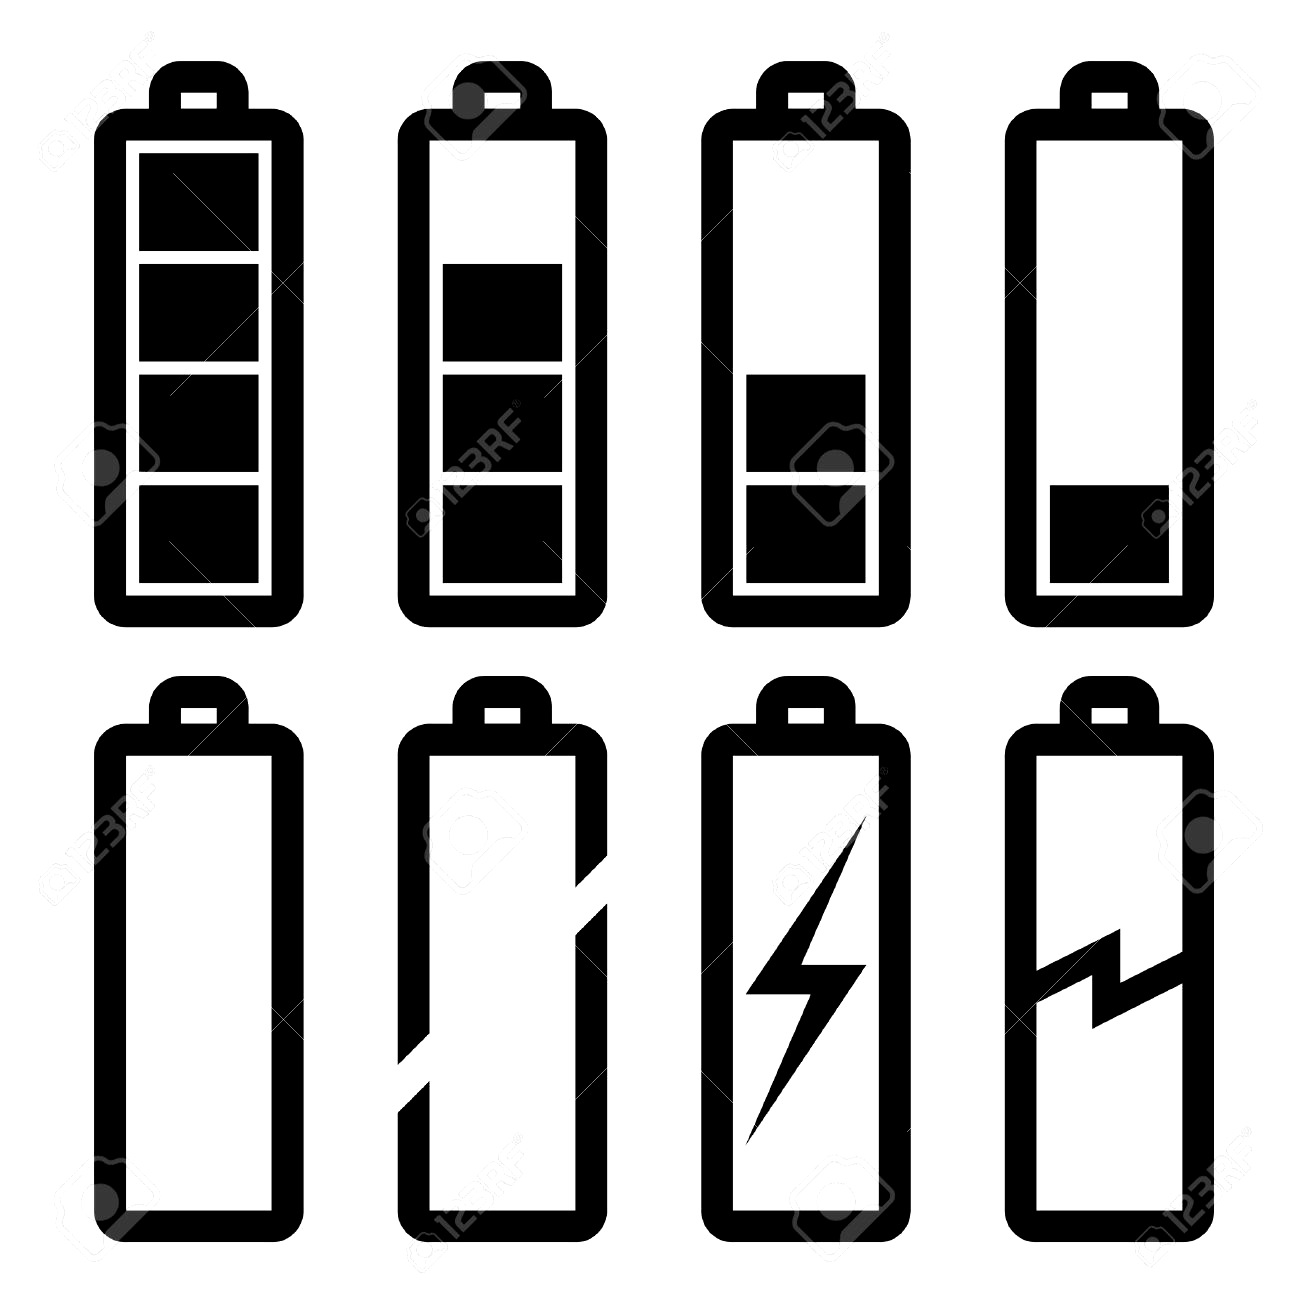 Component. symbol for a battery: Battery Icon And Symbol Stock ...